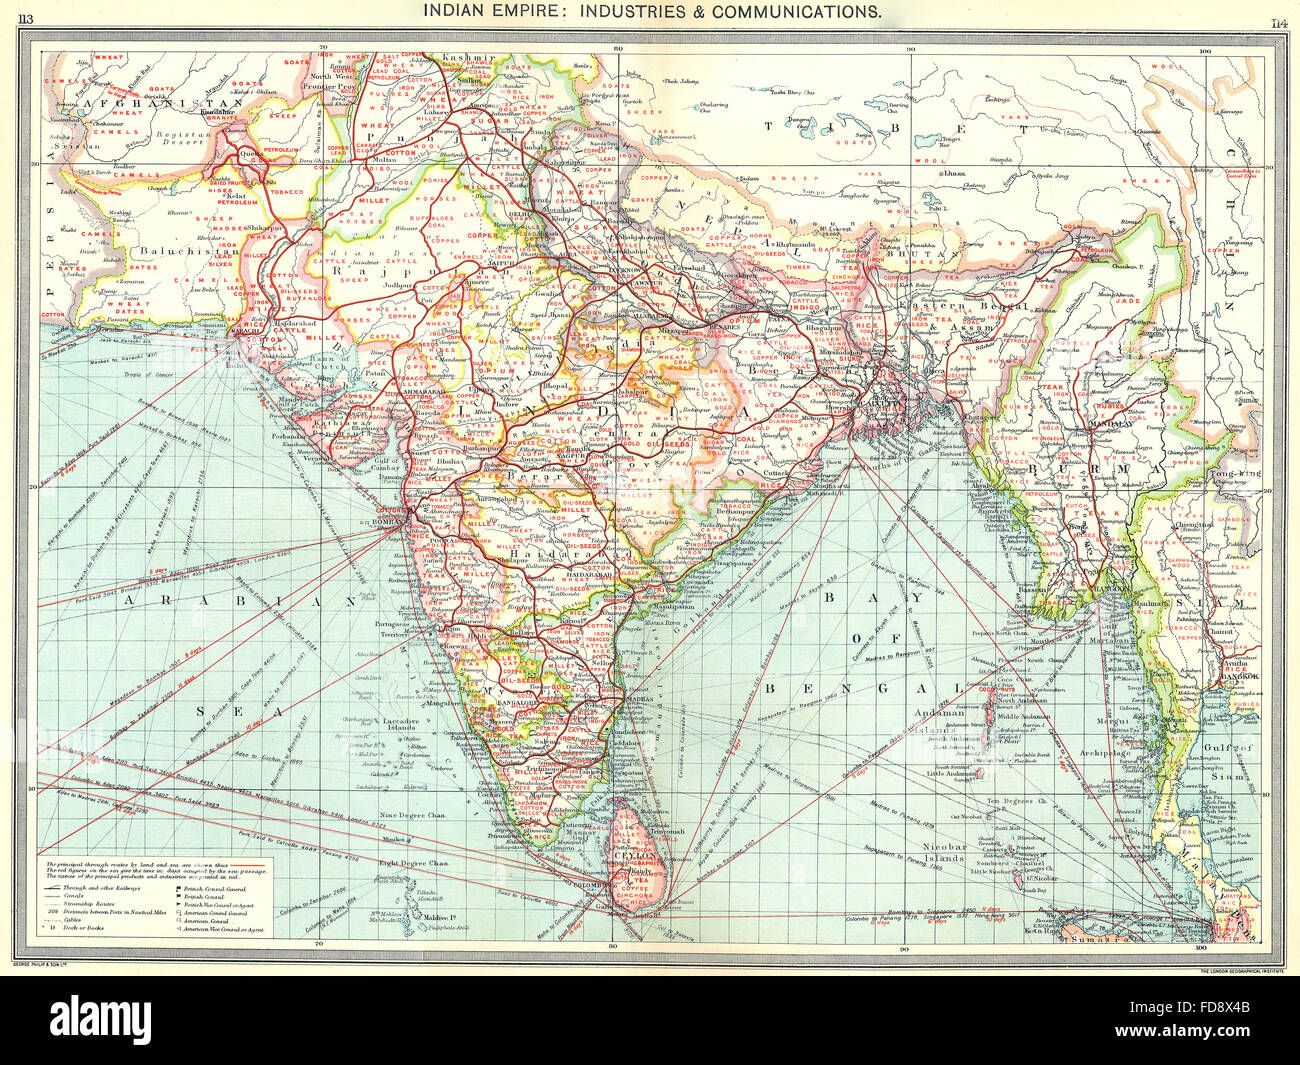 INDIA: Indian Empire: Industries and Communications, 1907 antique map Stock Photo